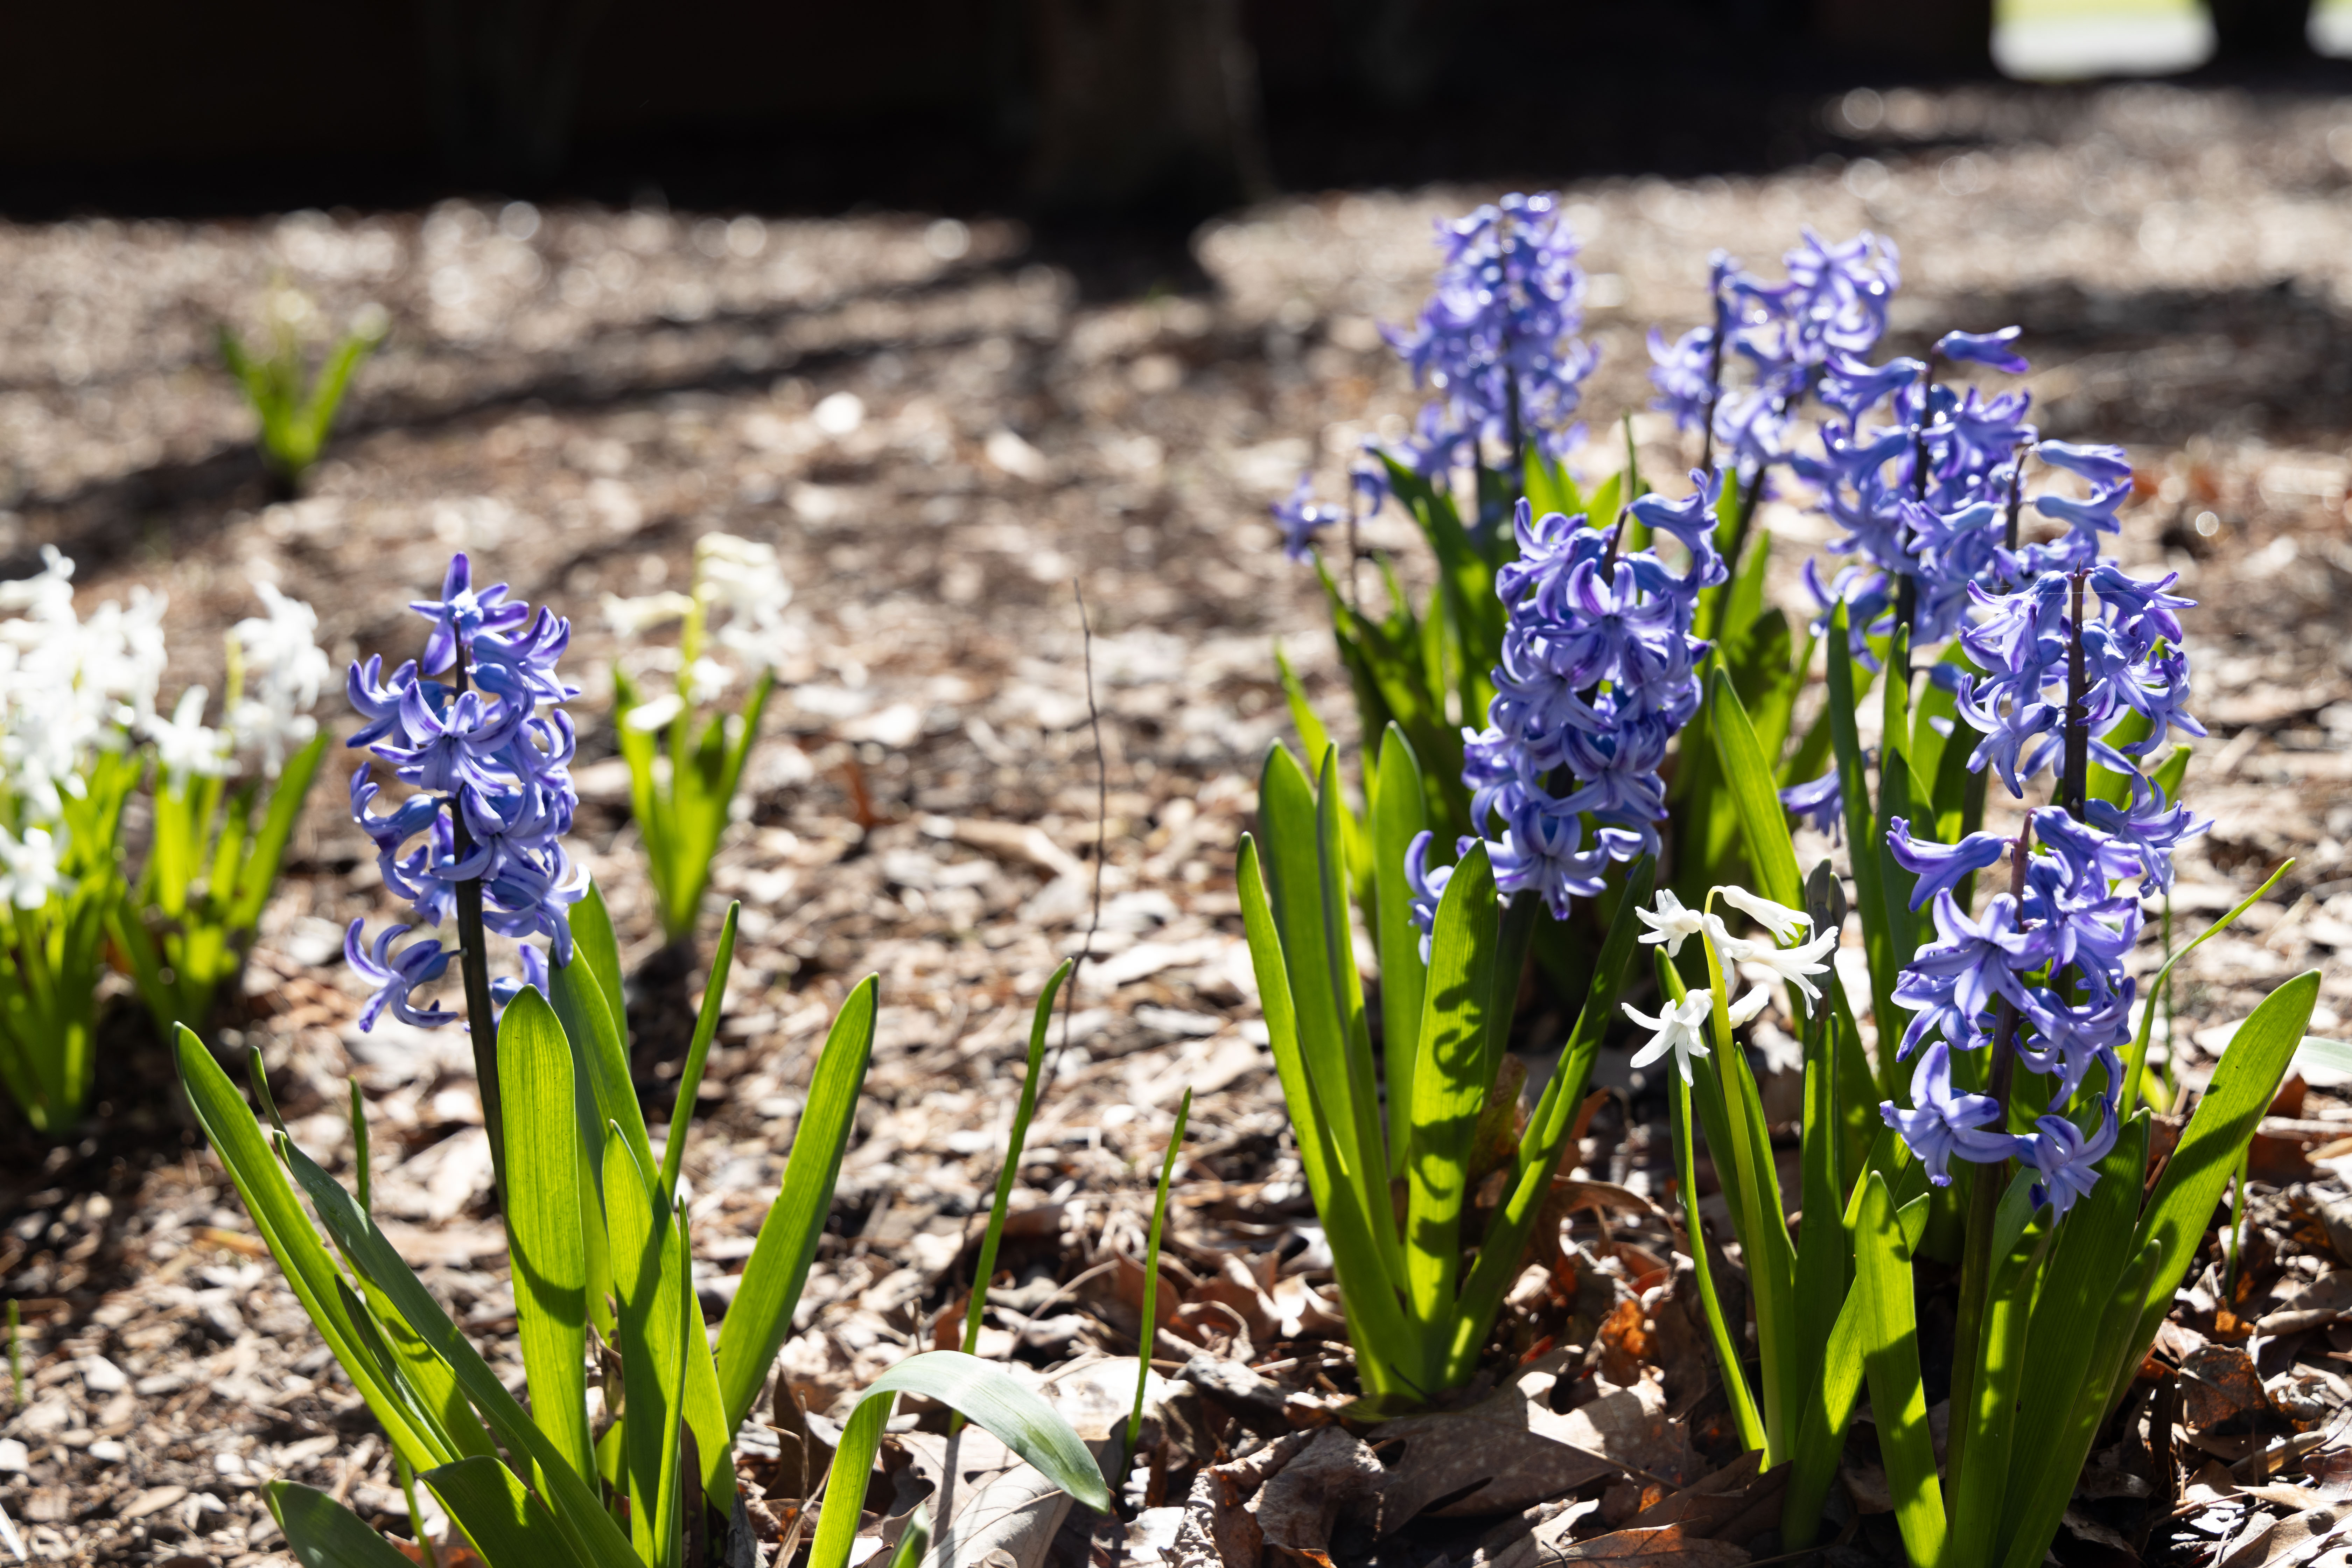 Purple hyacinths blooming in front of the Landscape Management offices.